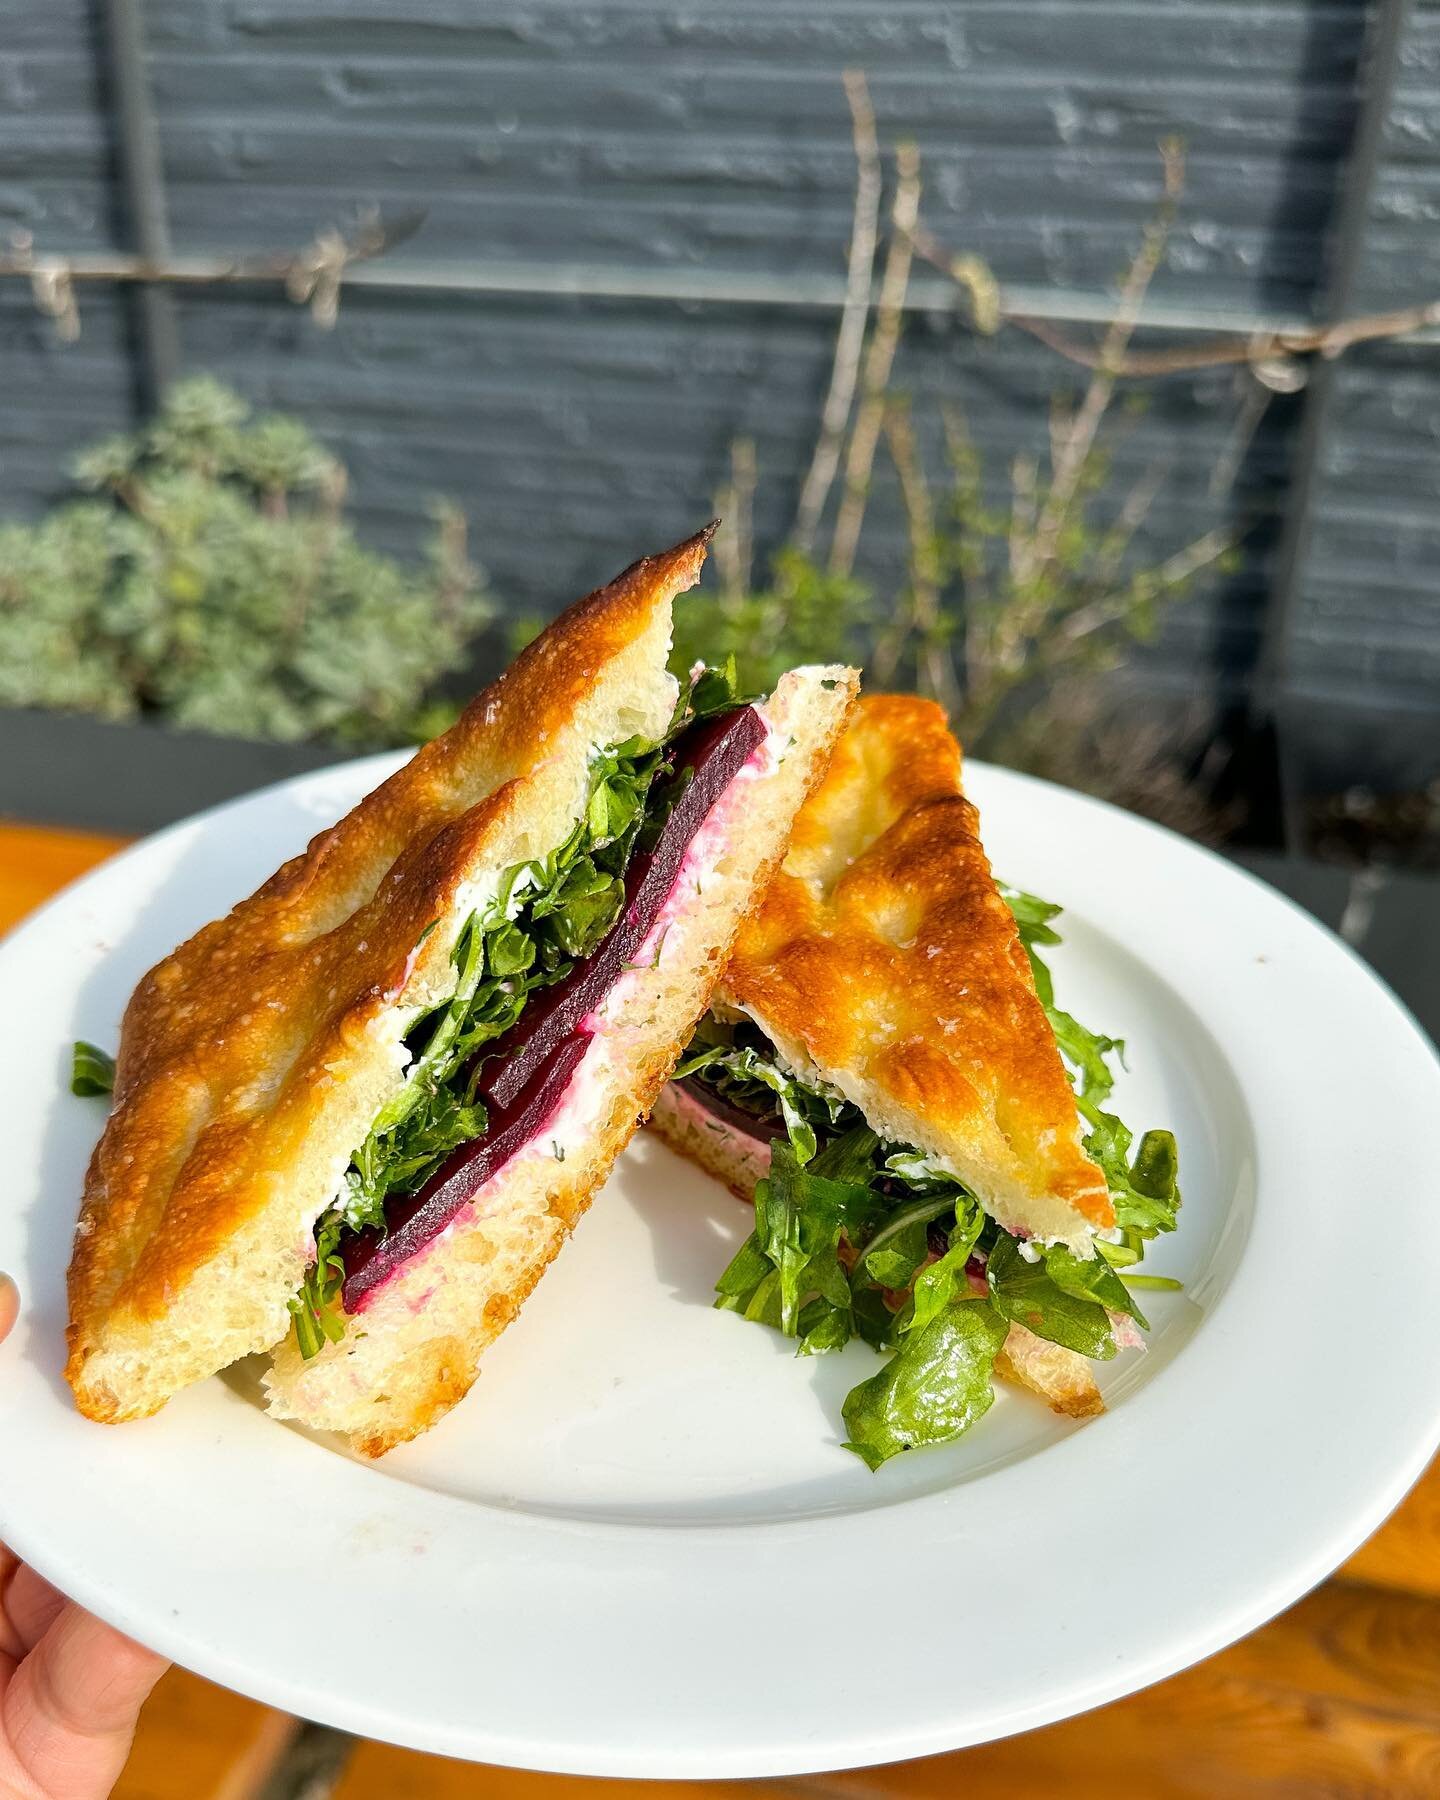 It&rsquo;s new veggie sandwich day! The star of the show here is confit BEETS; slow-cooked in olive oil with spices and citrus. These delicious beets are accompanied by a ricotta-goat cheese spread, arugula, &amp; preserved lemon vinaigrette -- all o